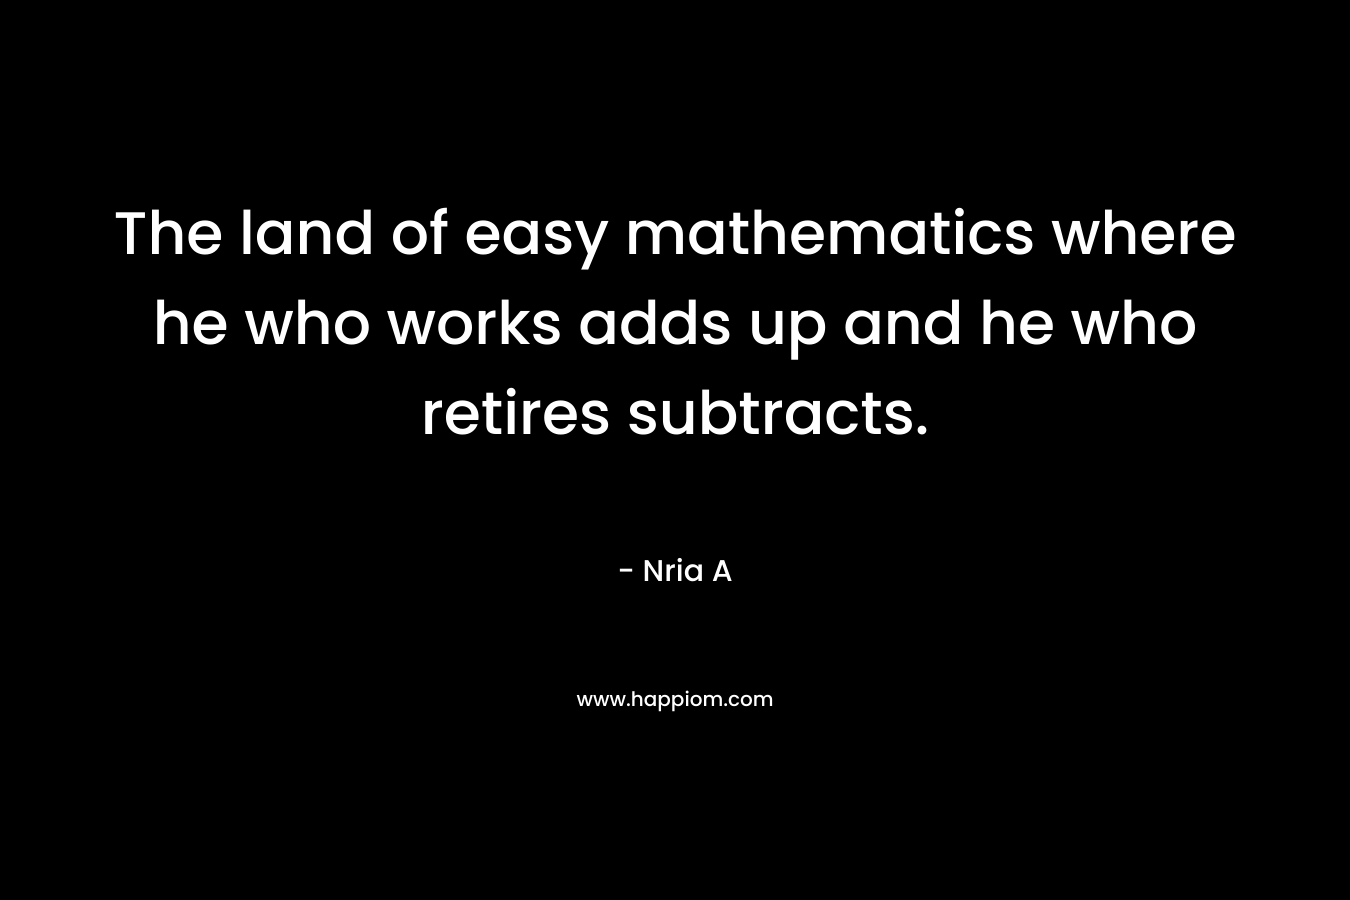 The land of easy mathematics where he who works adds up and he who retires subtracts.